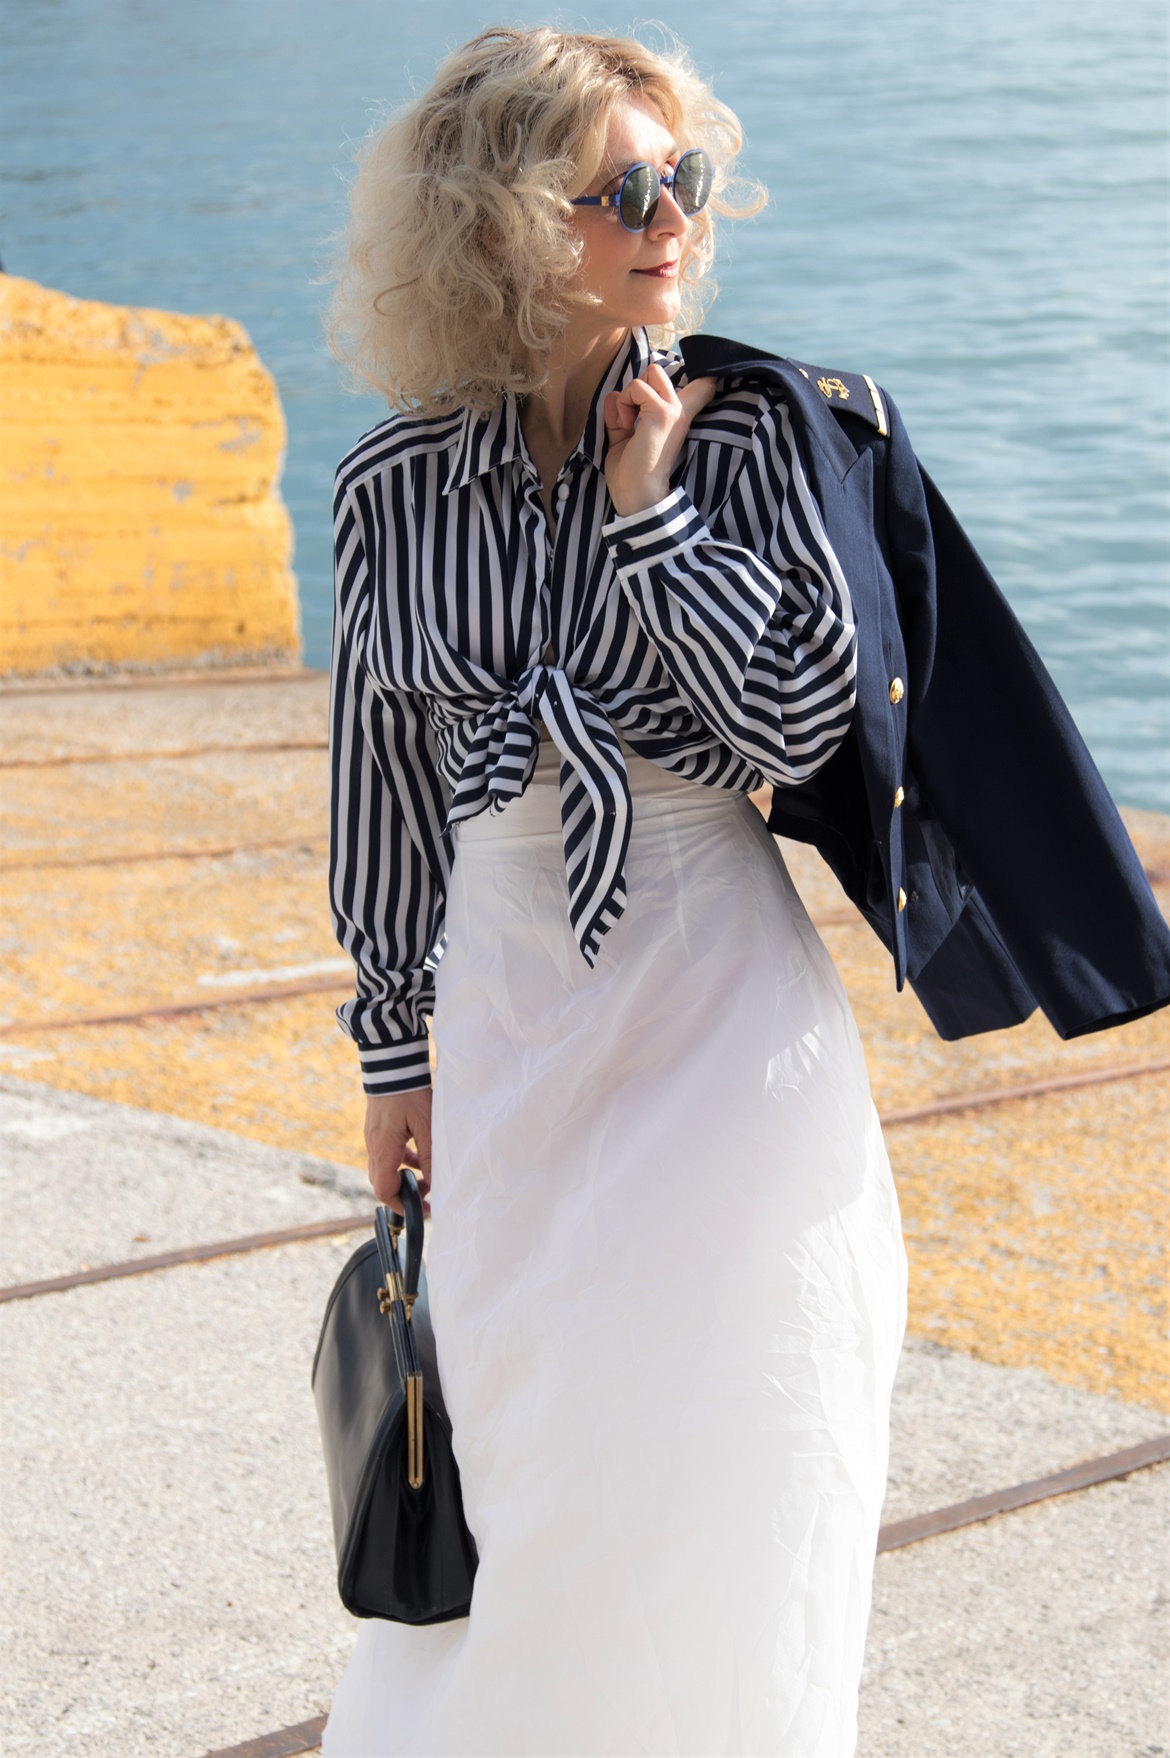 Discover now five reasons to wear today the iconic Breton shirt.